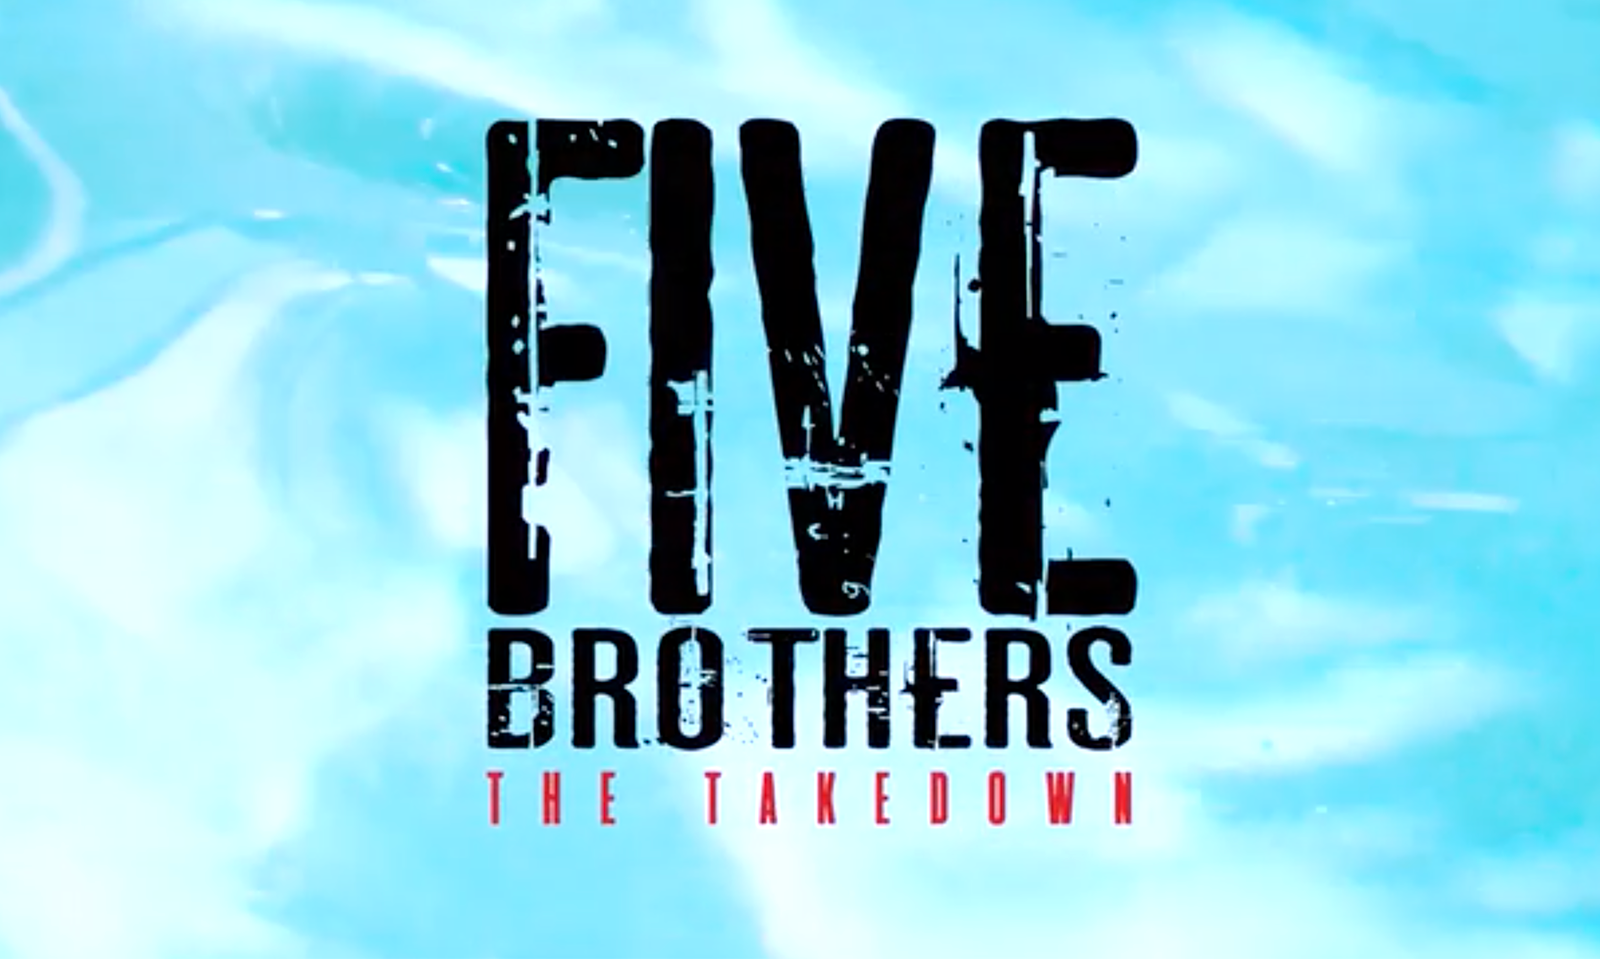 NakedSword Creates Site for 'Five Brothers: The Takedown'